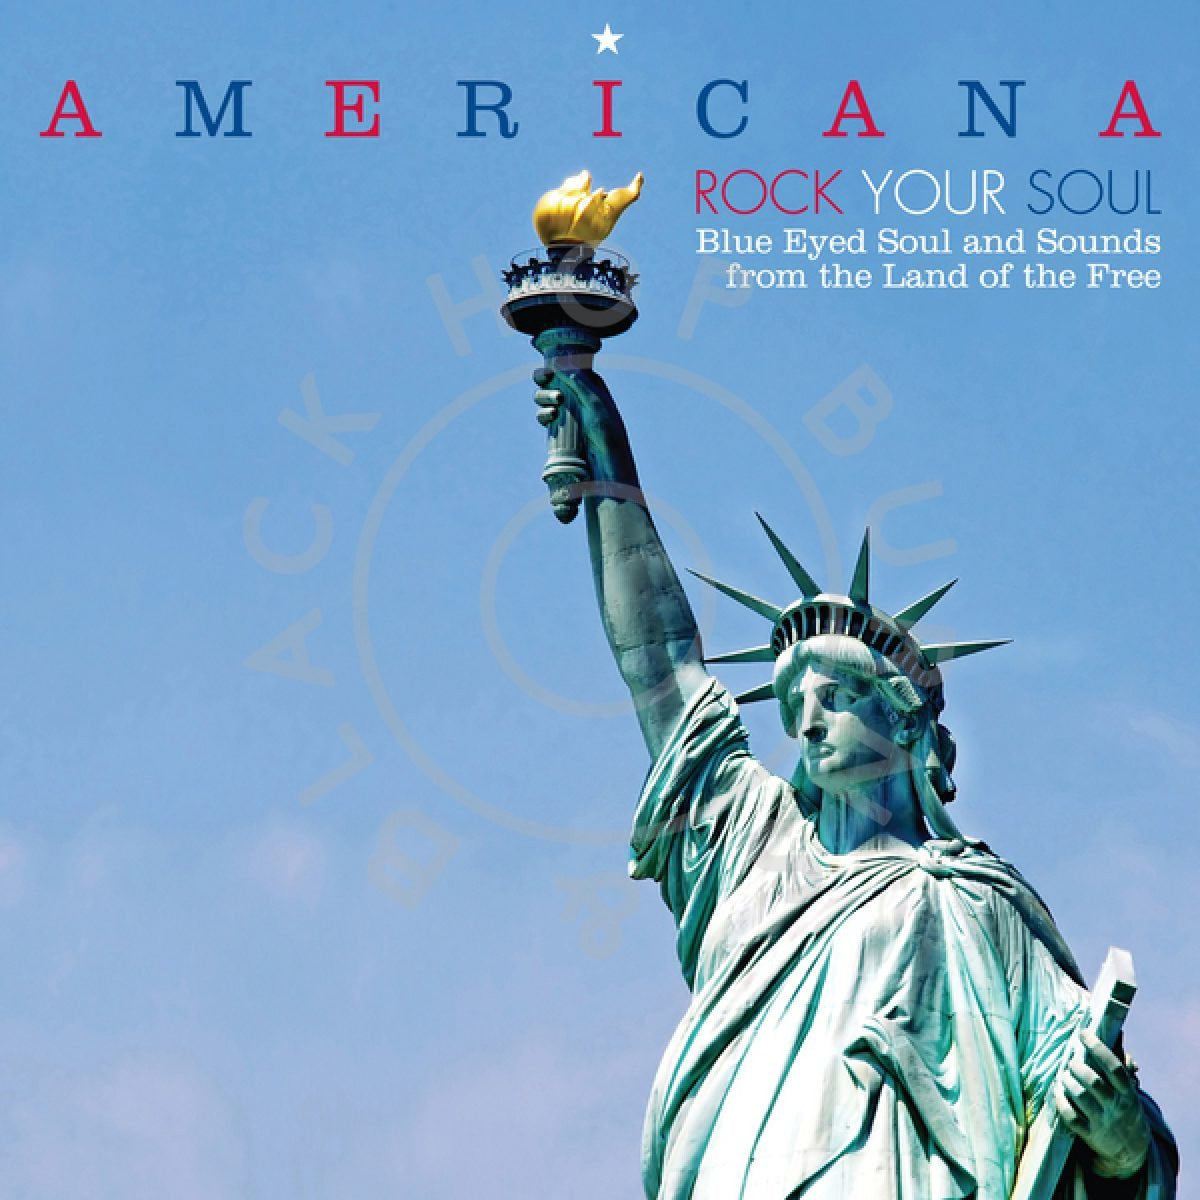 V/A - Americana Rock Your Soul - Blue Eyed Soul and Sounds from the Land of the Free LP-Hop Burns & Black